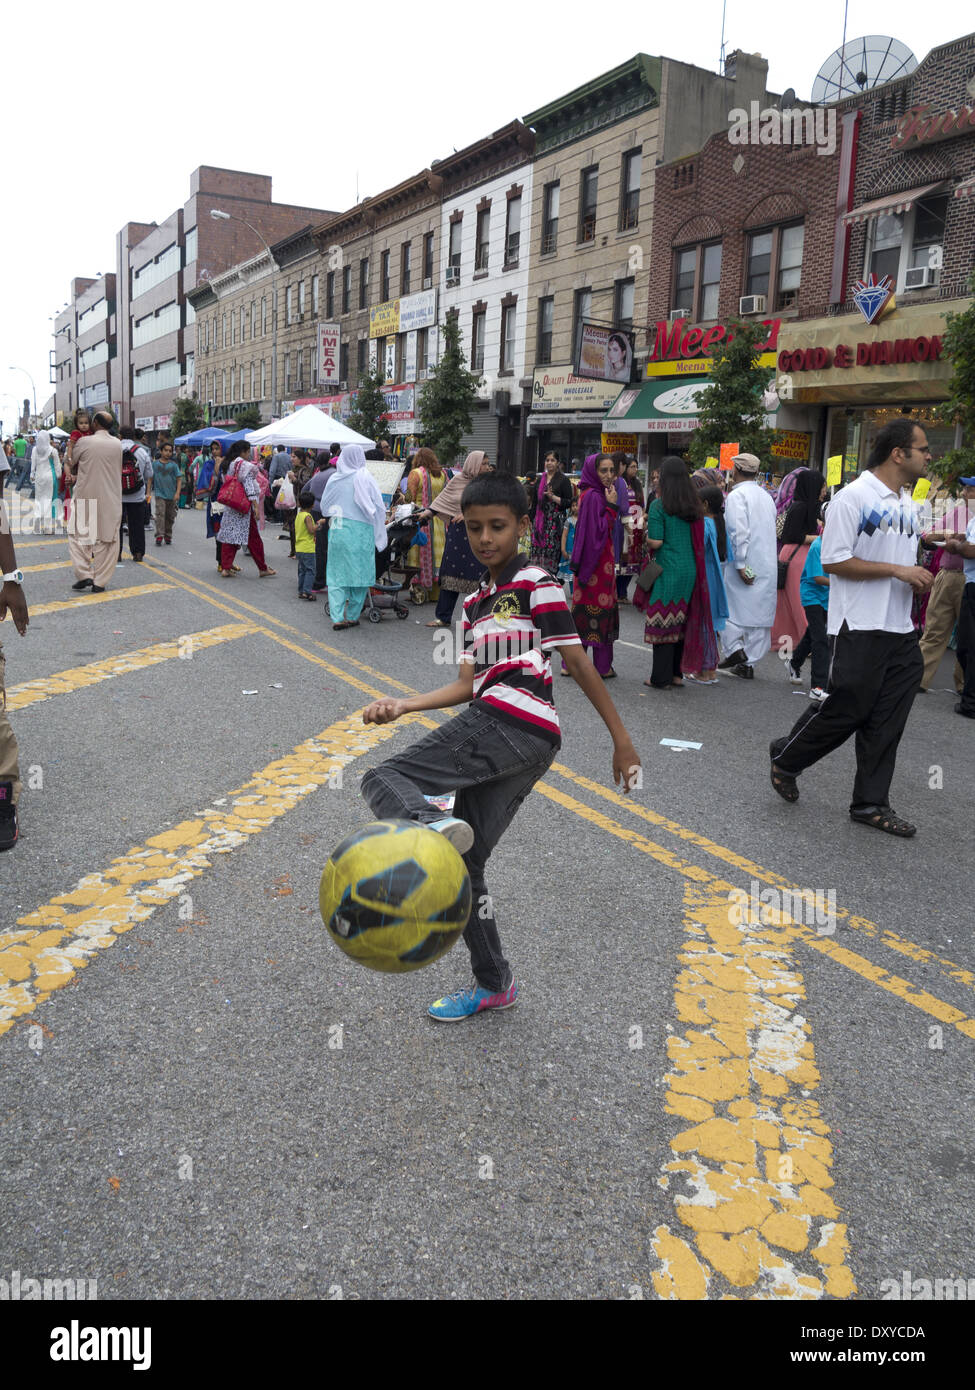 Pakistani Independence Day street festival and fair in 'Little Pakistan' in the Midwood section of Brooklyn, NY, 2012. Stock Photo